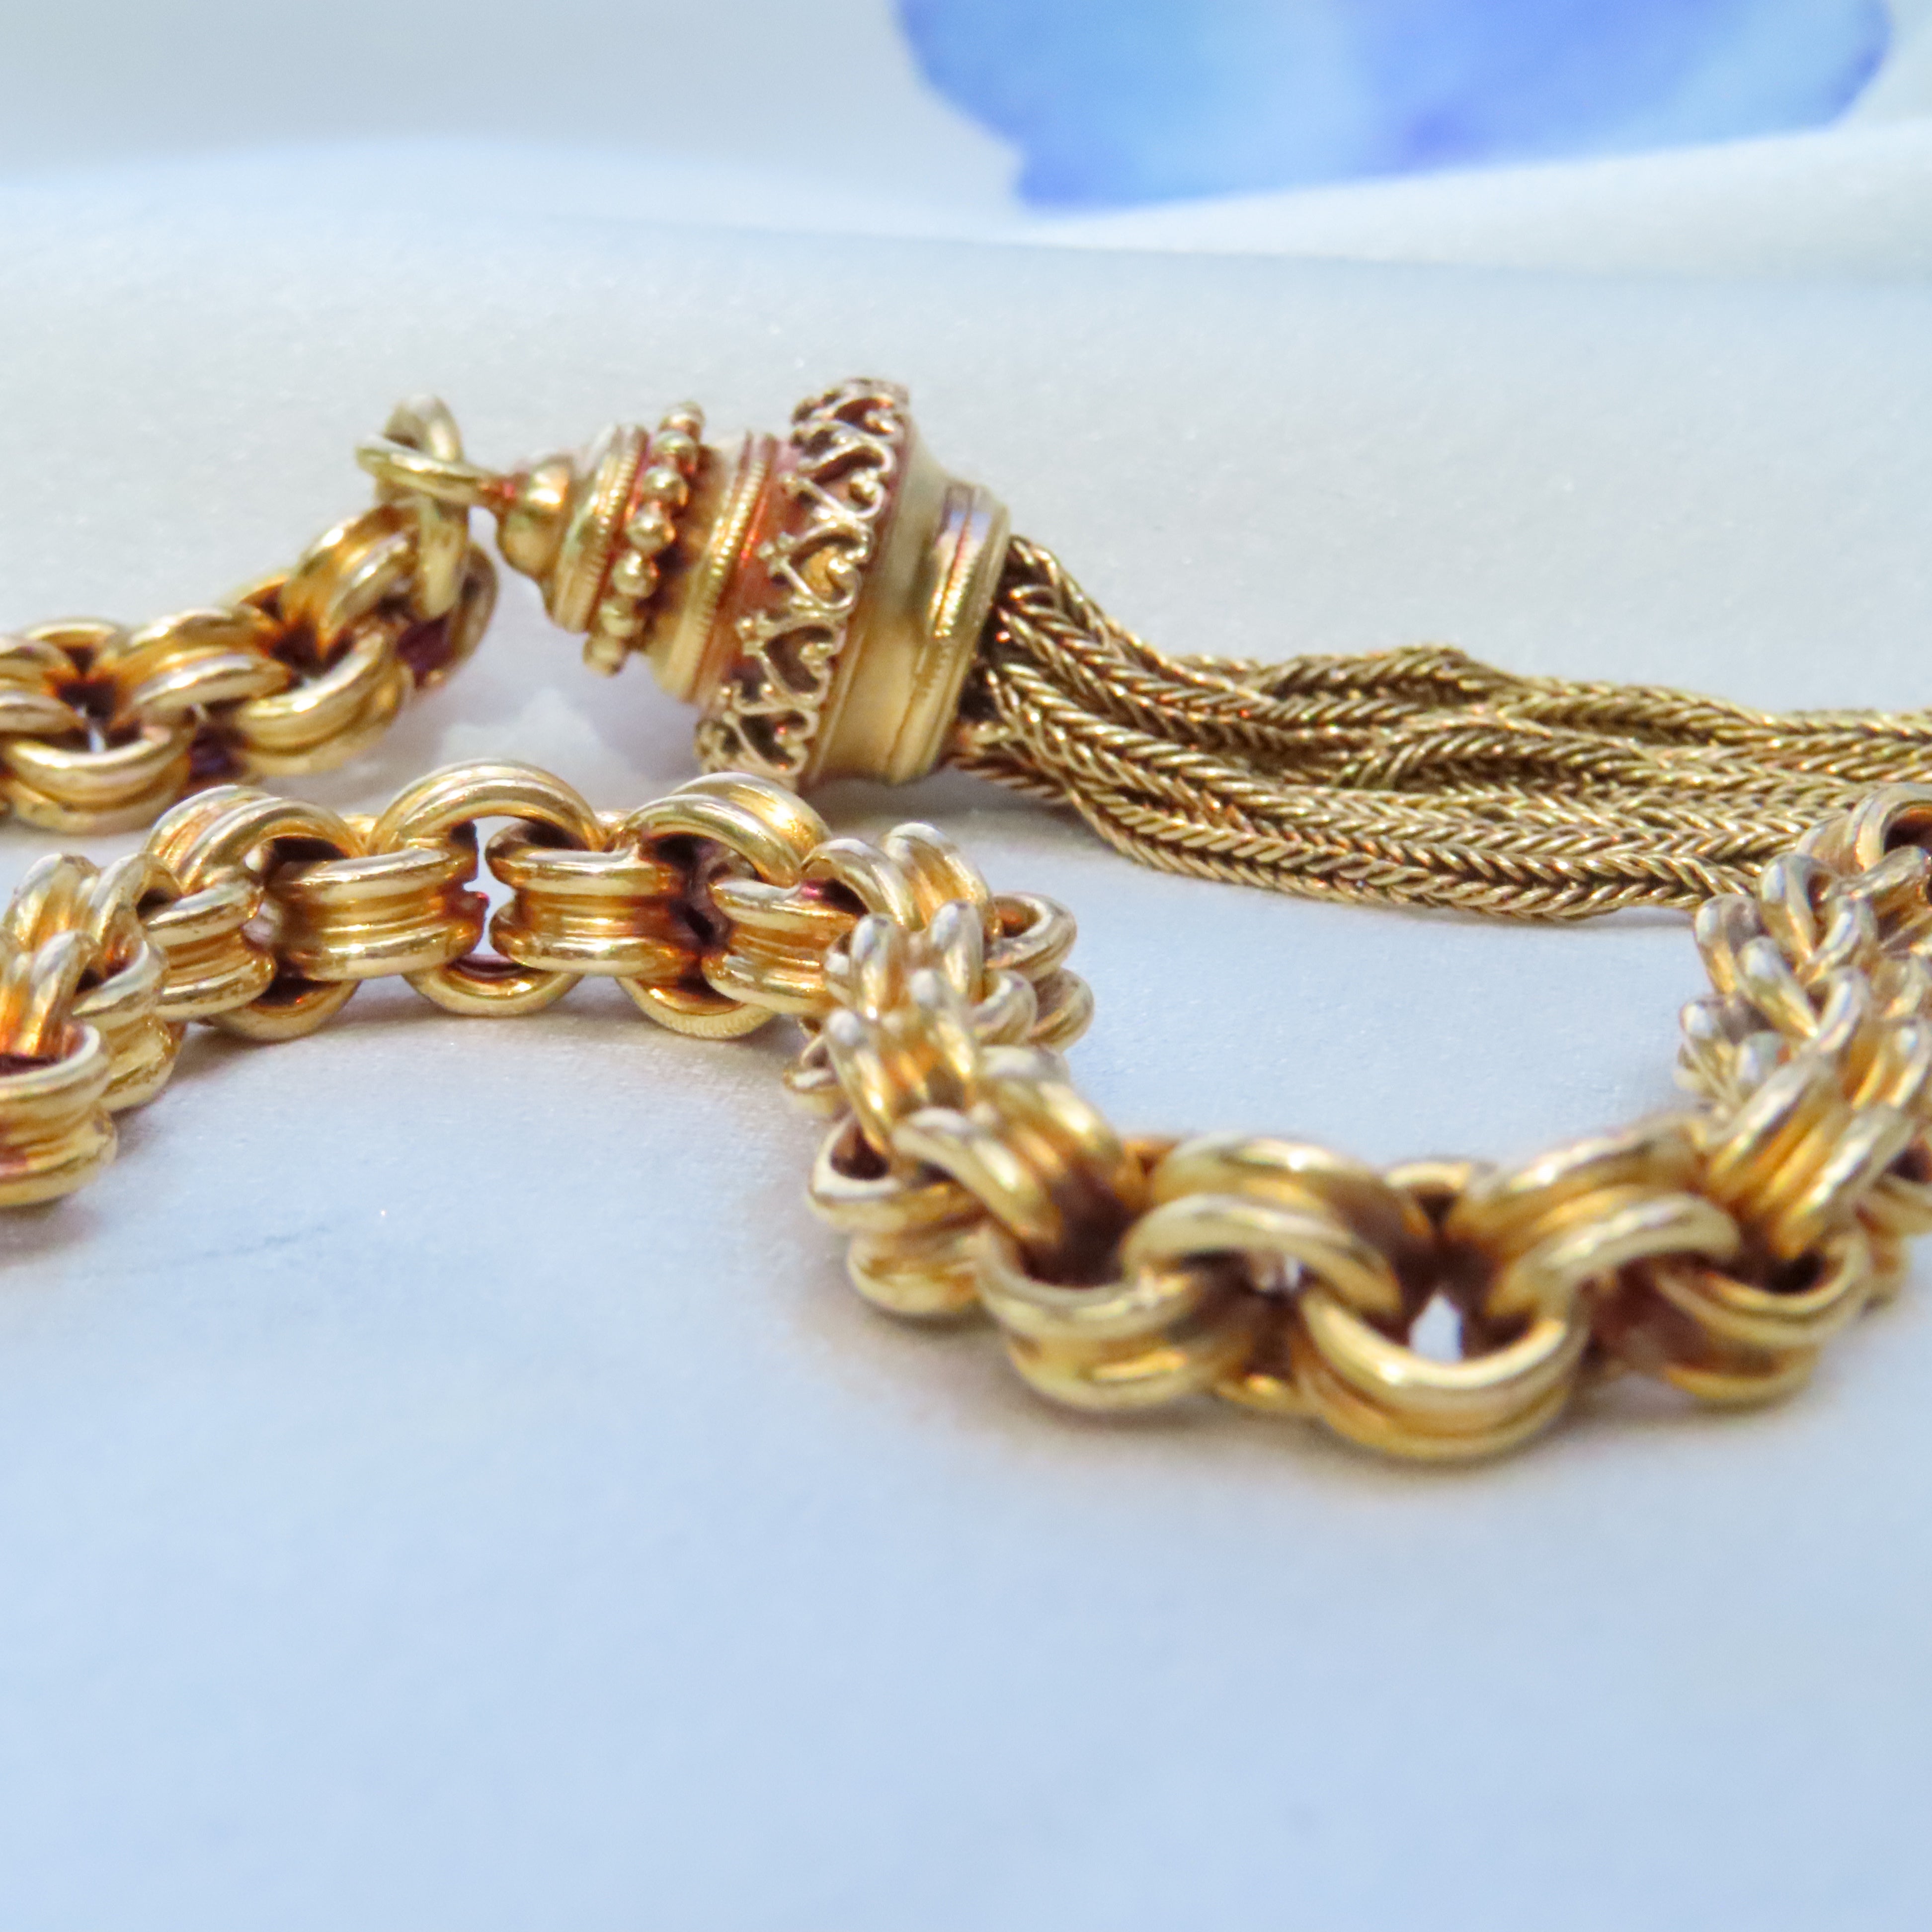 15ct albertina chain bracelet close up of tassels and orb